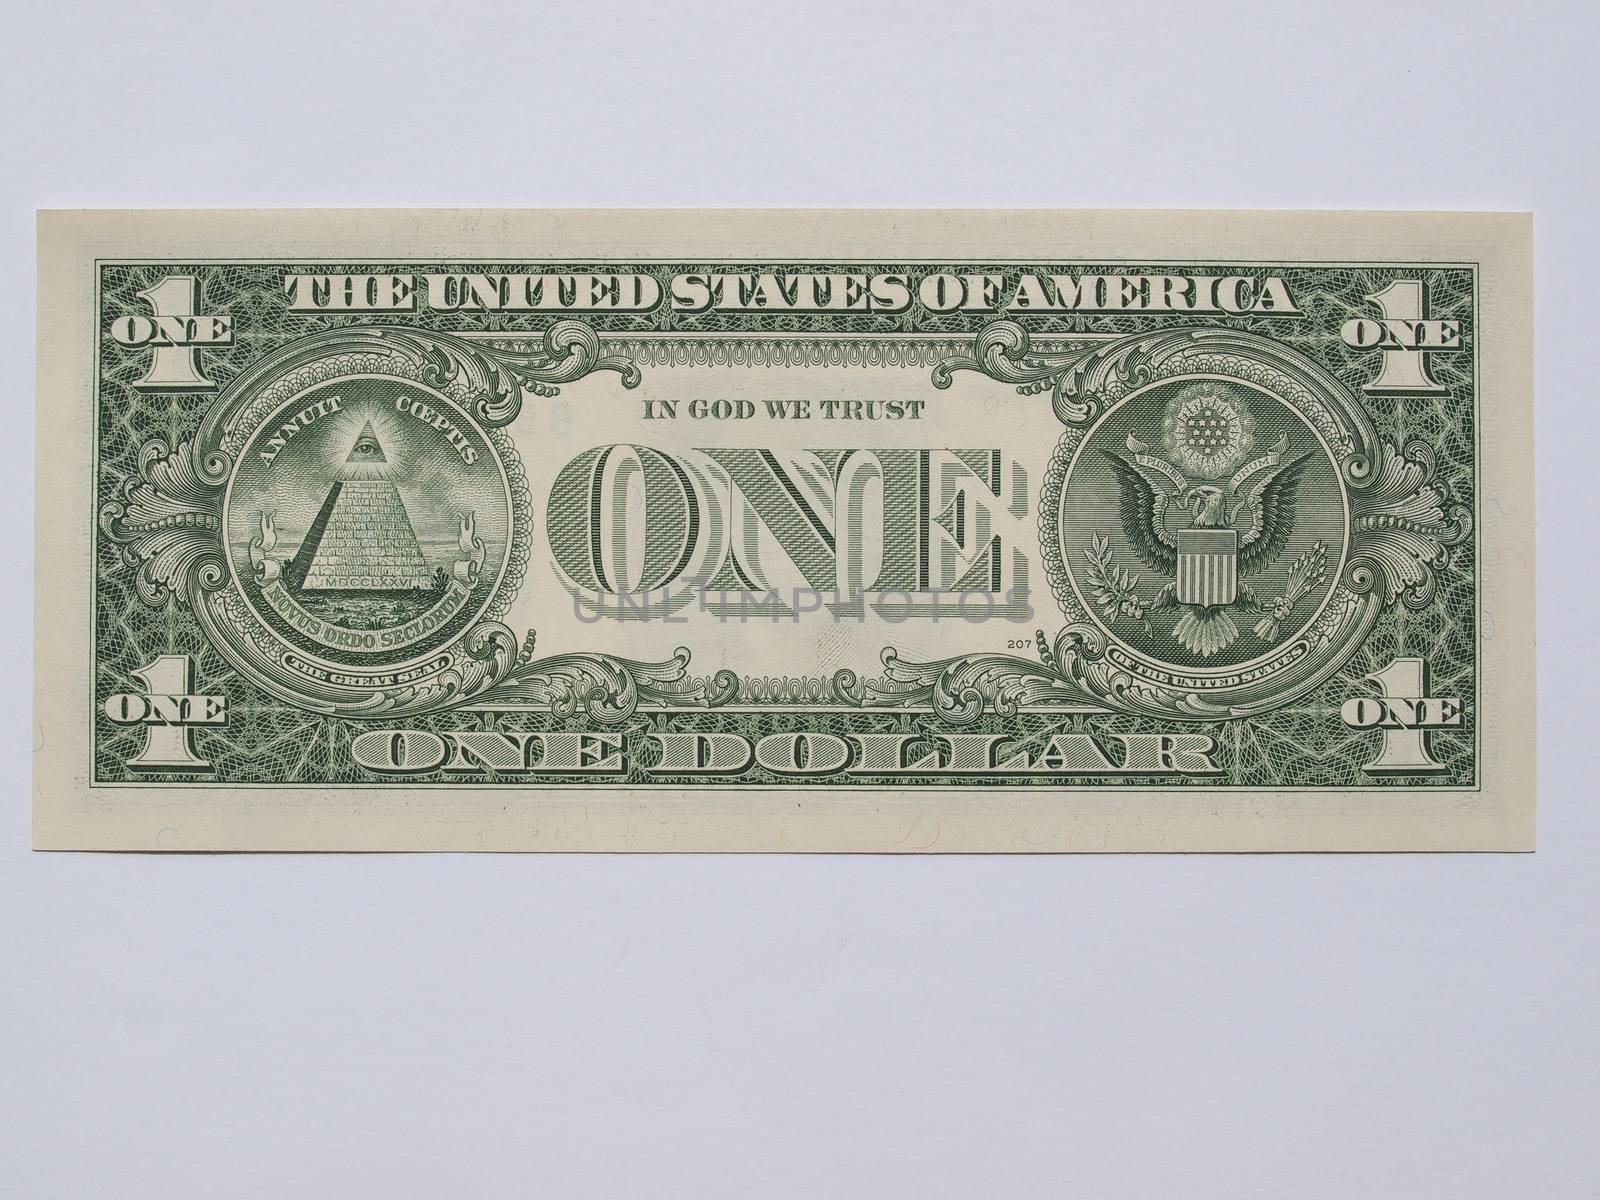 Currency of the United States 1 Dollar banknote